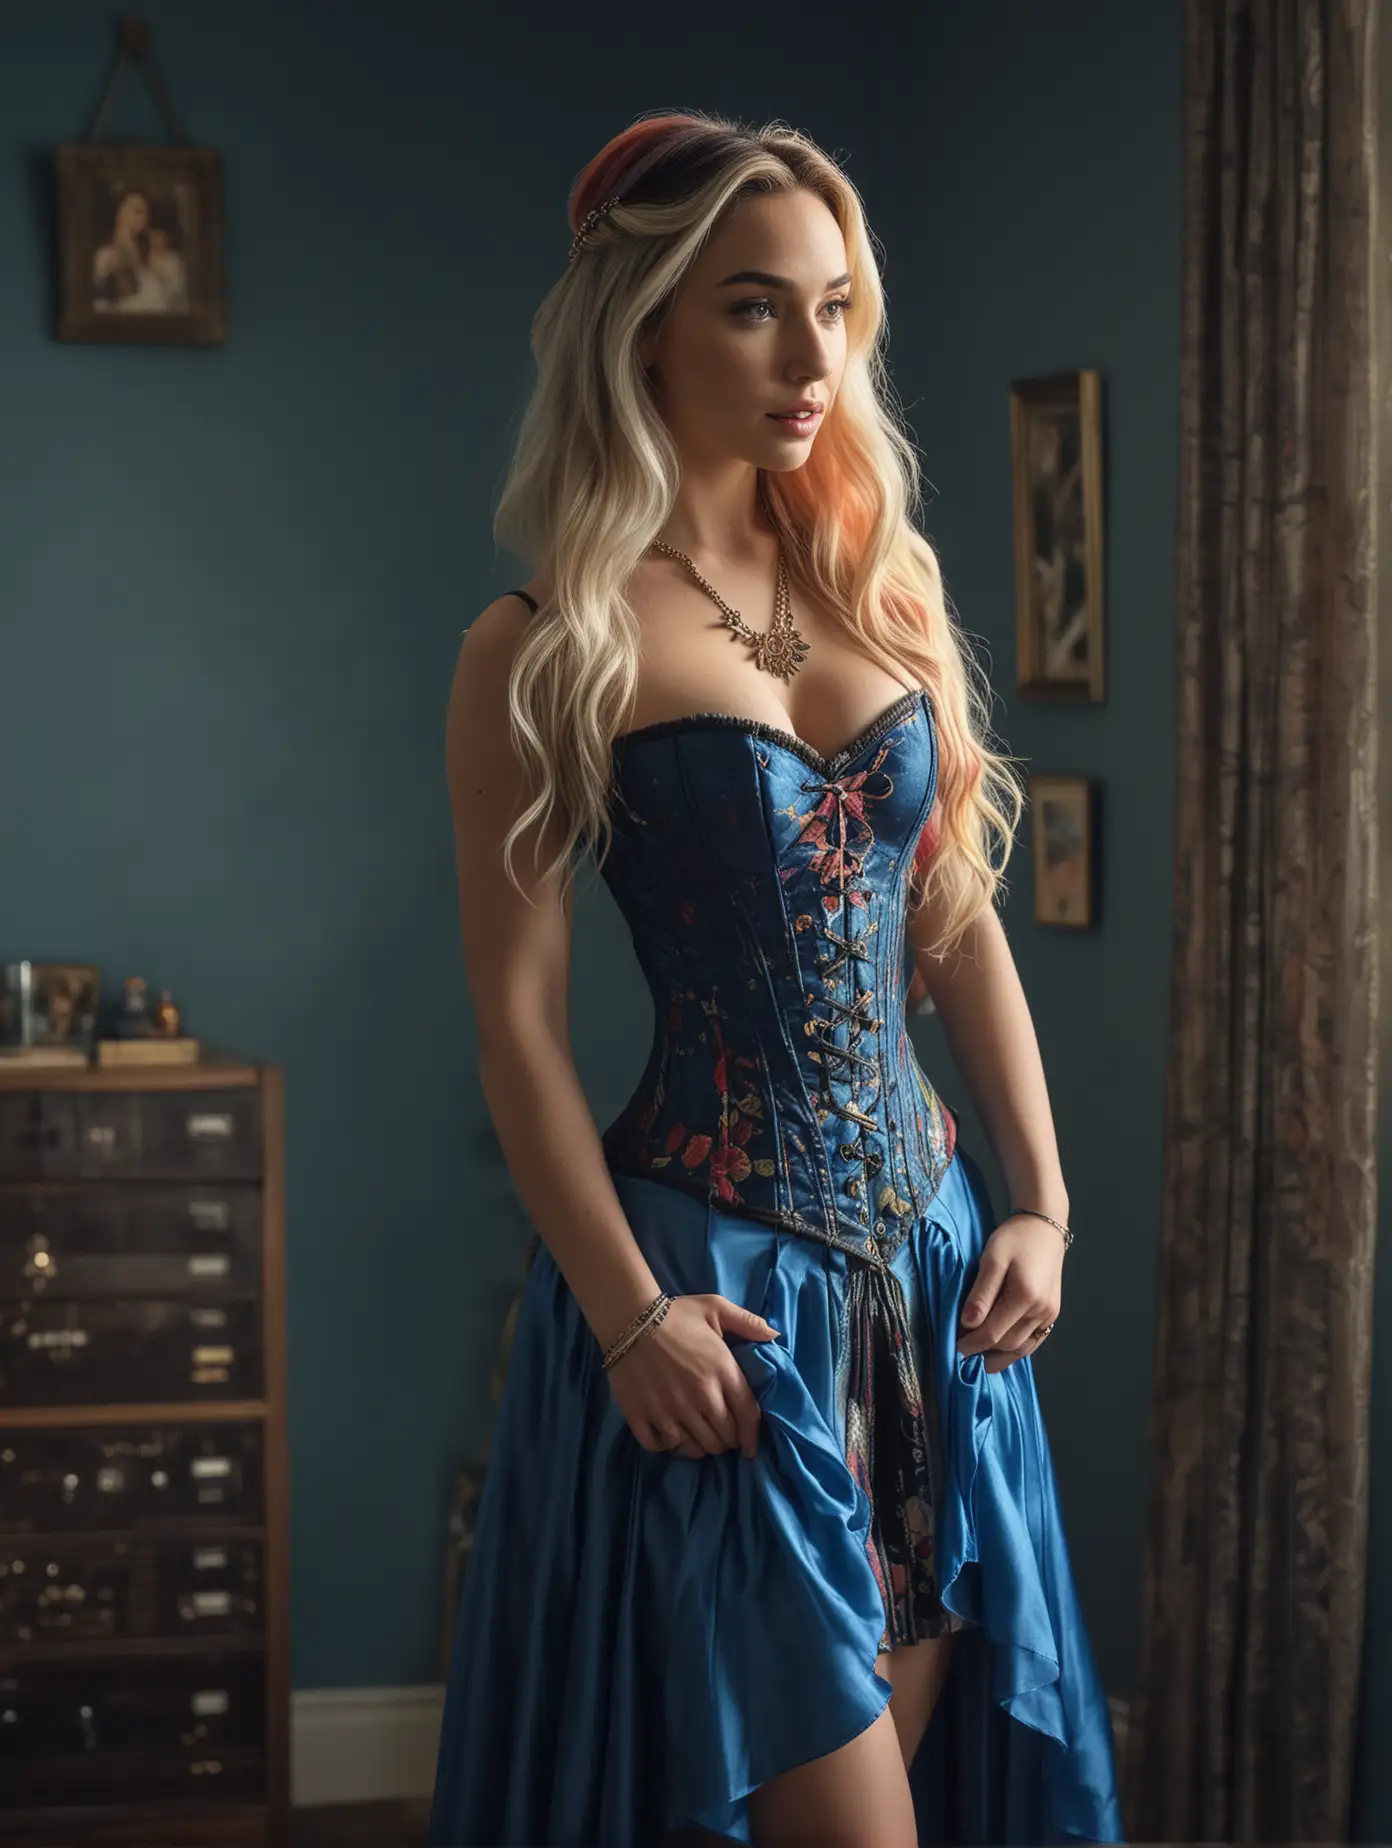 Enchanting-Portrait-of-Paige-Spiranac-in-Multicolored-Corset-and-Blue-Skirt